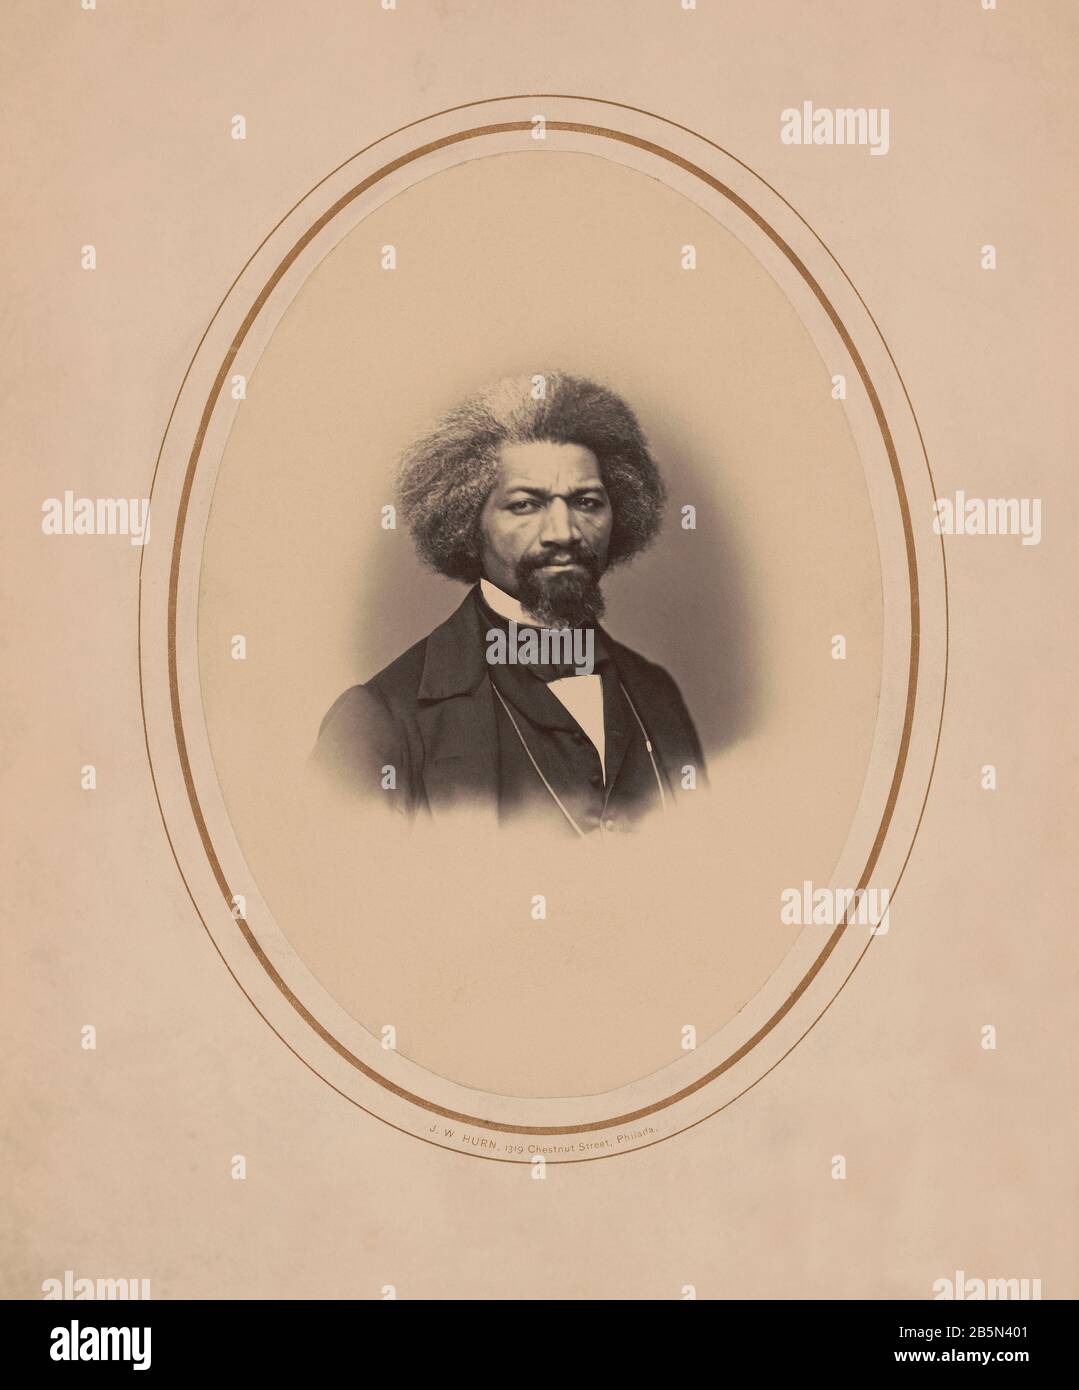 Frederick Douglass (1818-95), American Social Reformer, Abolitionist and Statesman, Head and Shoulders Portrait, photograph by John White Hurn, January 14, 1862 Stock Photo